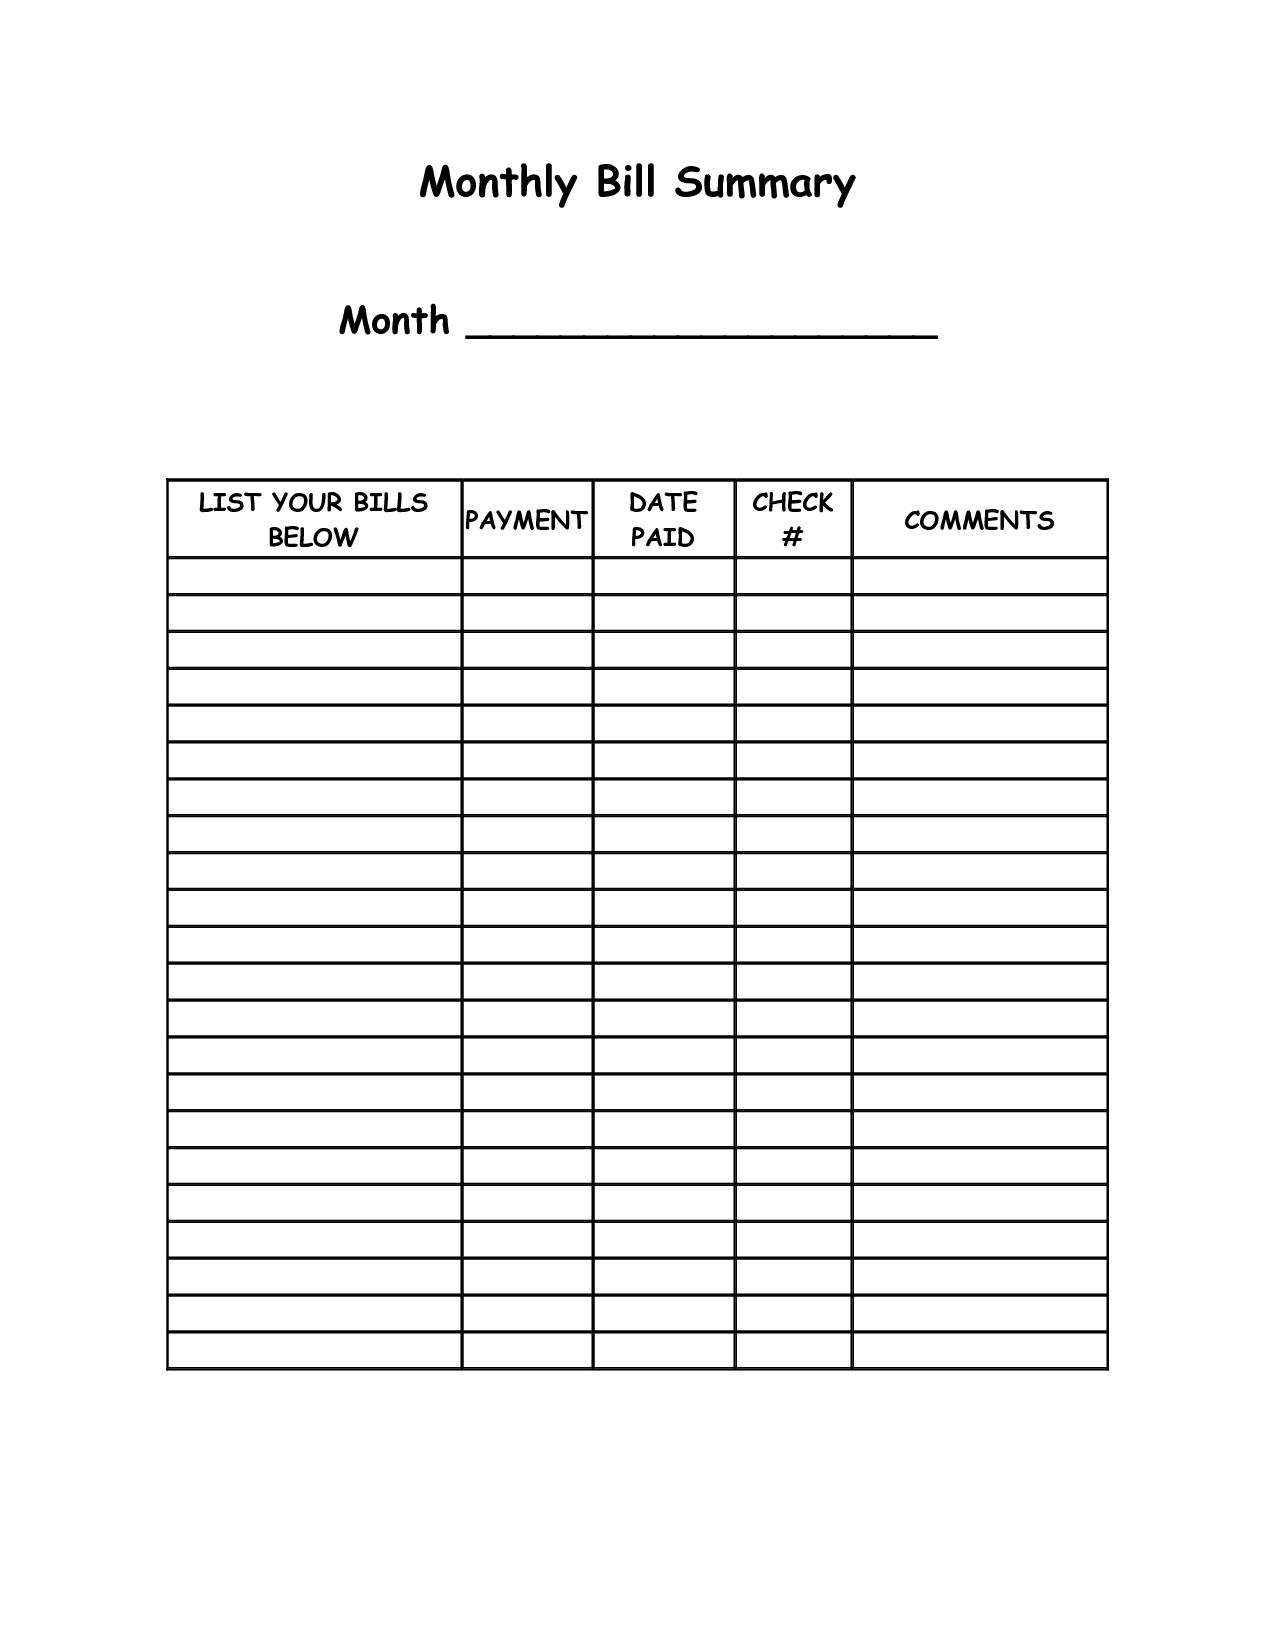 Monthly Bill Summary Doc | Organization | Bill Payment Organization inside Printable Bill Month Calendar Pages